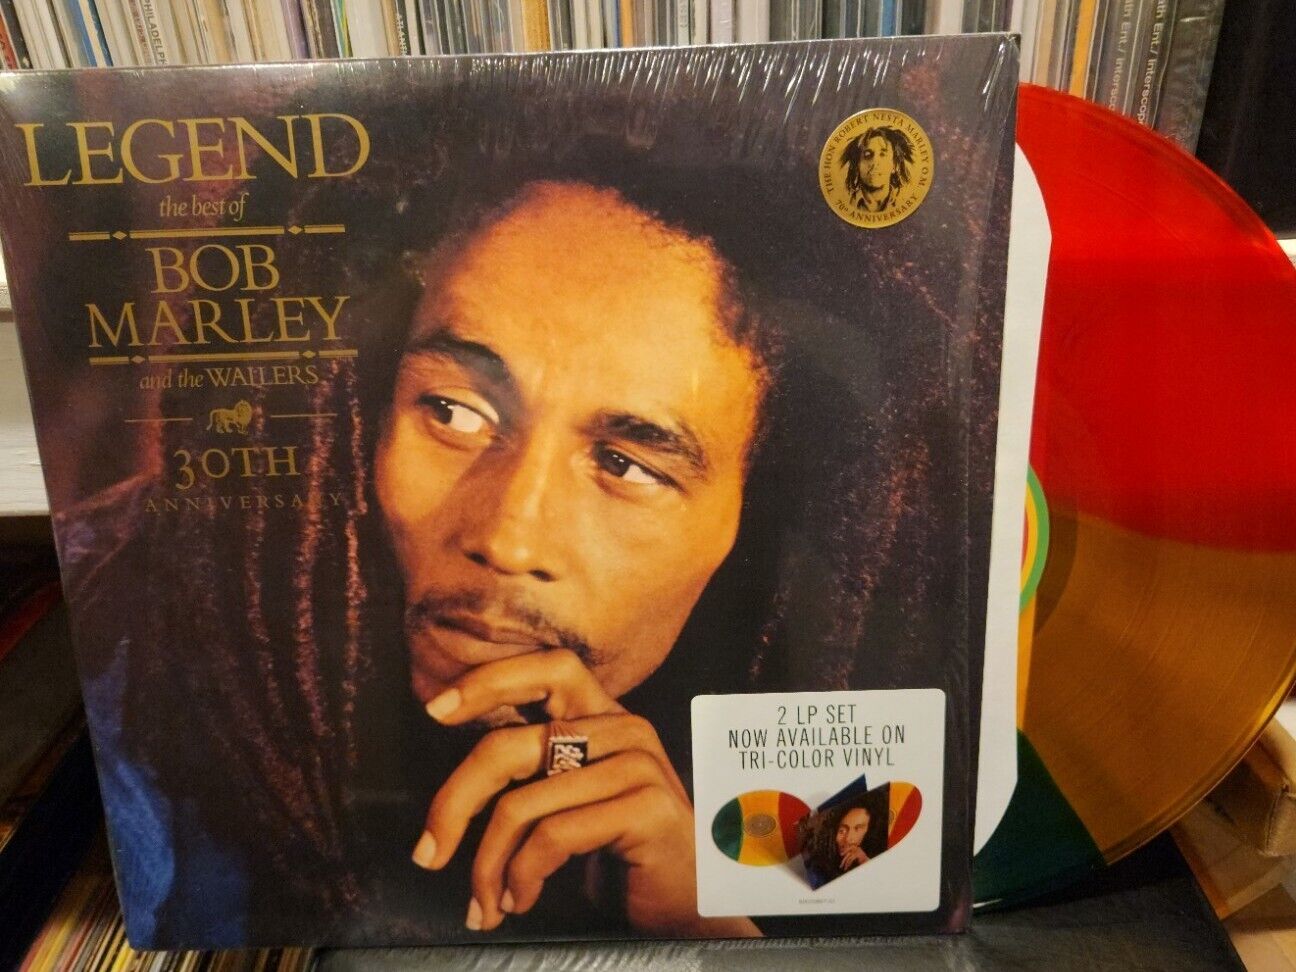 Bob Marley & Wailers Legend 30th Anniversary Edition Open Mint Never Played